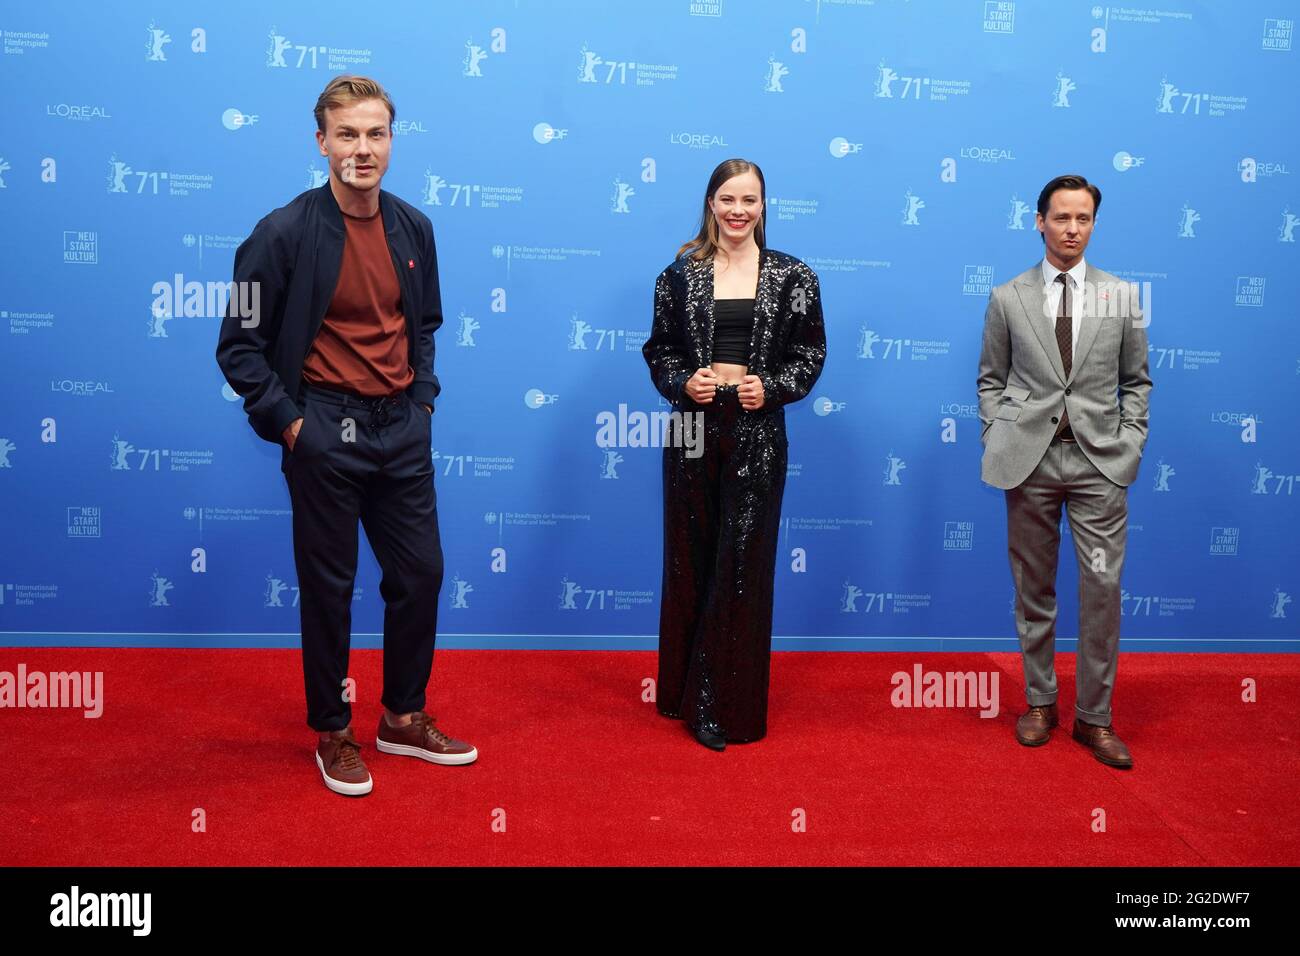 Actors Albrecht Schuch, Saskia Rosendahl and Tom Schilling pose on the red  carpet for the screening of the film "Fabian oder Der Gang vor die Hunde"  (Fabian - Going to the Dogs)